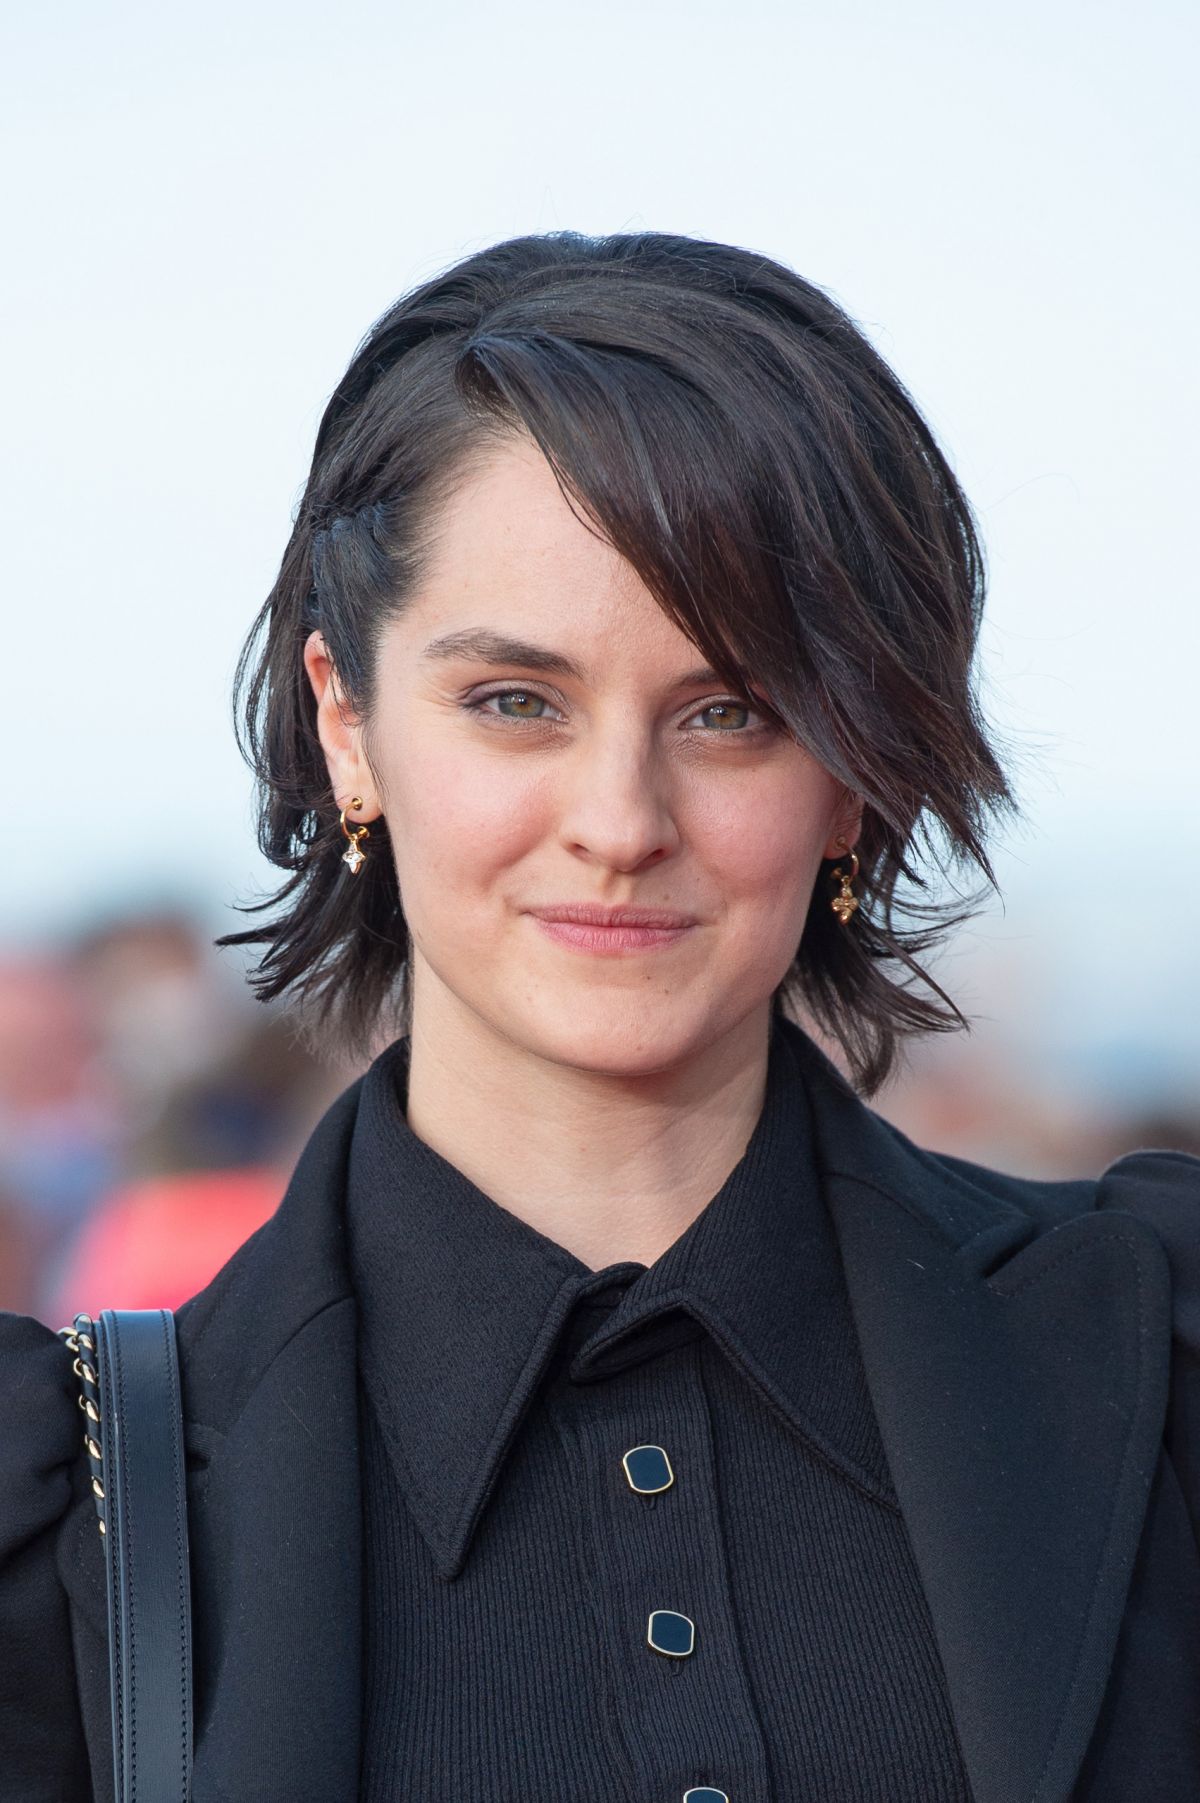 Noémie Merlant Wore Louis Vuitton To The 37th Cabourg Film Festival Closing  Ceremony